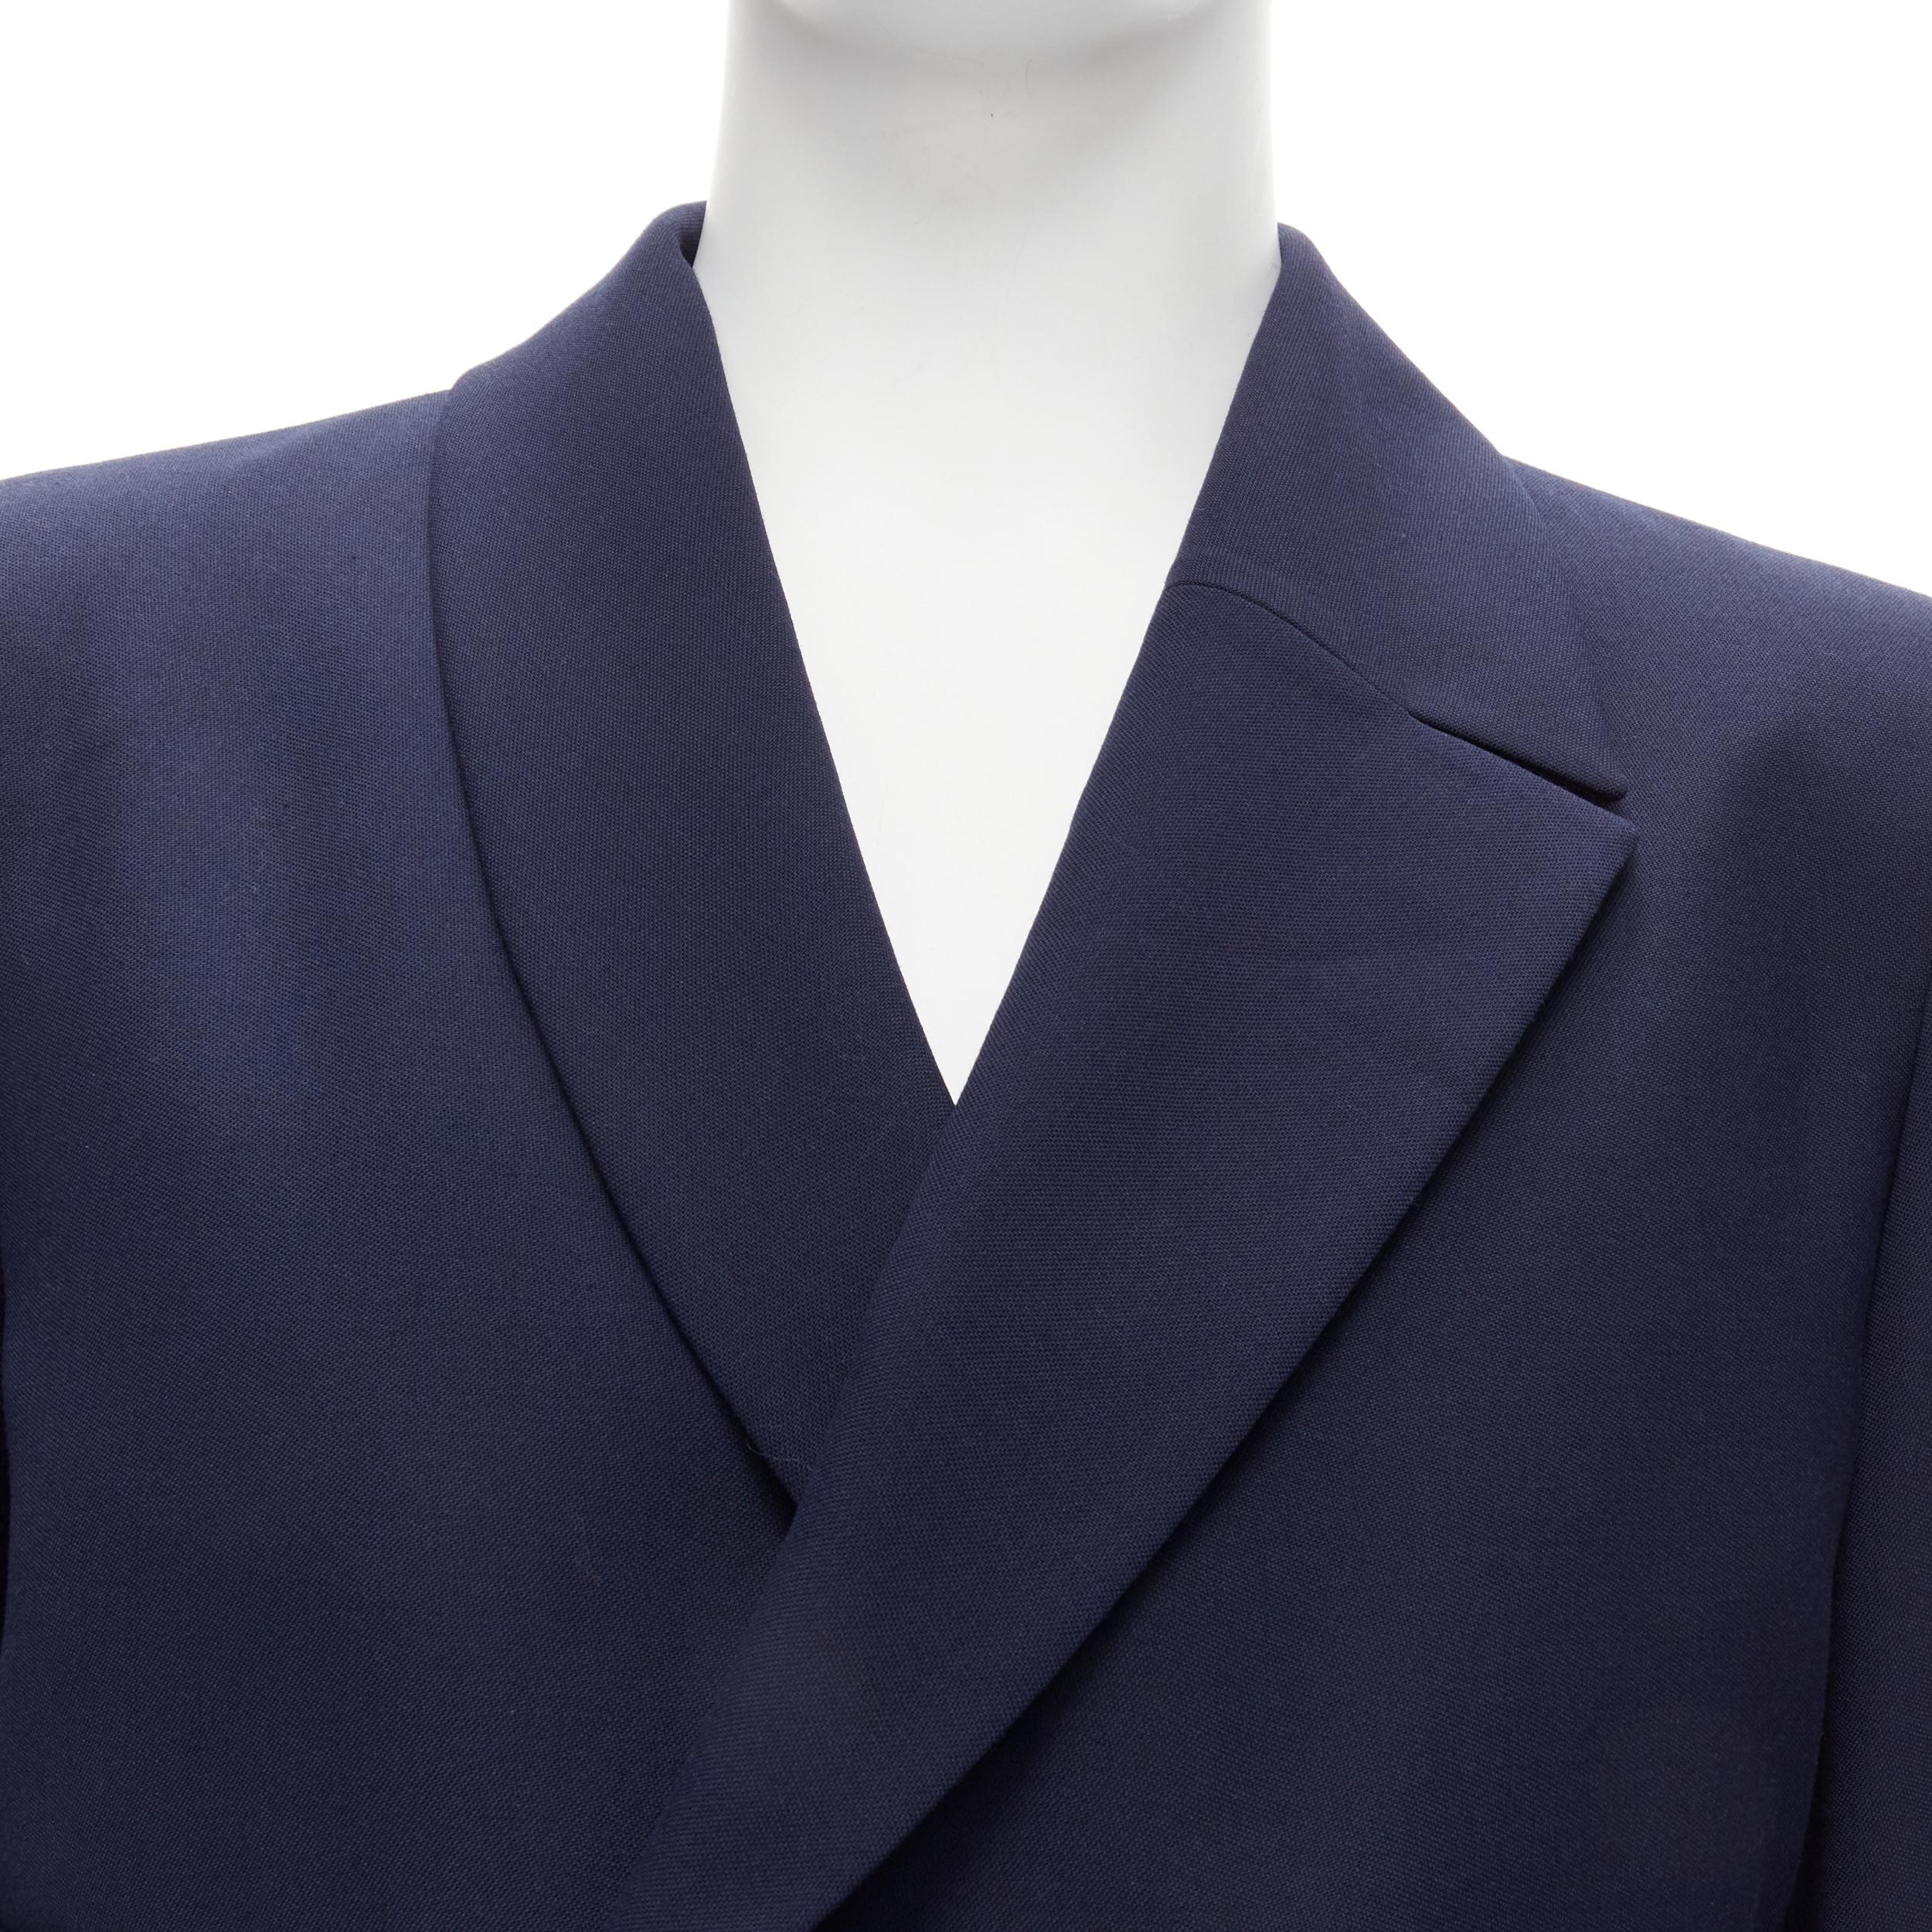 new FENDI 2019 Runway navy asymmetric double breasted cropped blazer IT48 M
Reference: CNLE/A00187
Brand: Fendi
Designer: Kim Jones
Collection: 2019 - Runway
Material: Polyester, Virgin Wool
Color: Navy
Pattern: Solid
Closure: Button
Extra Details: